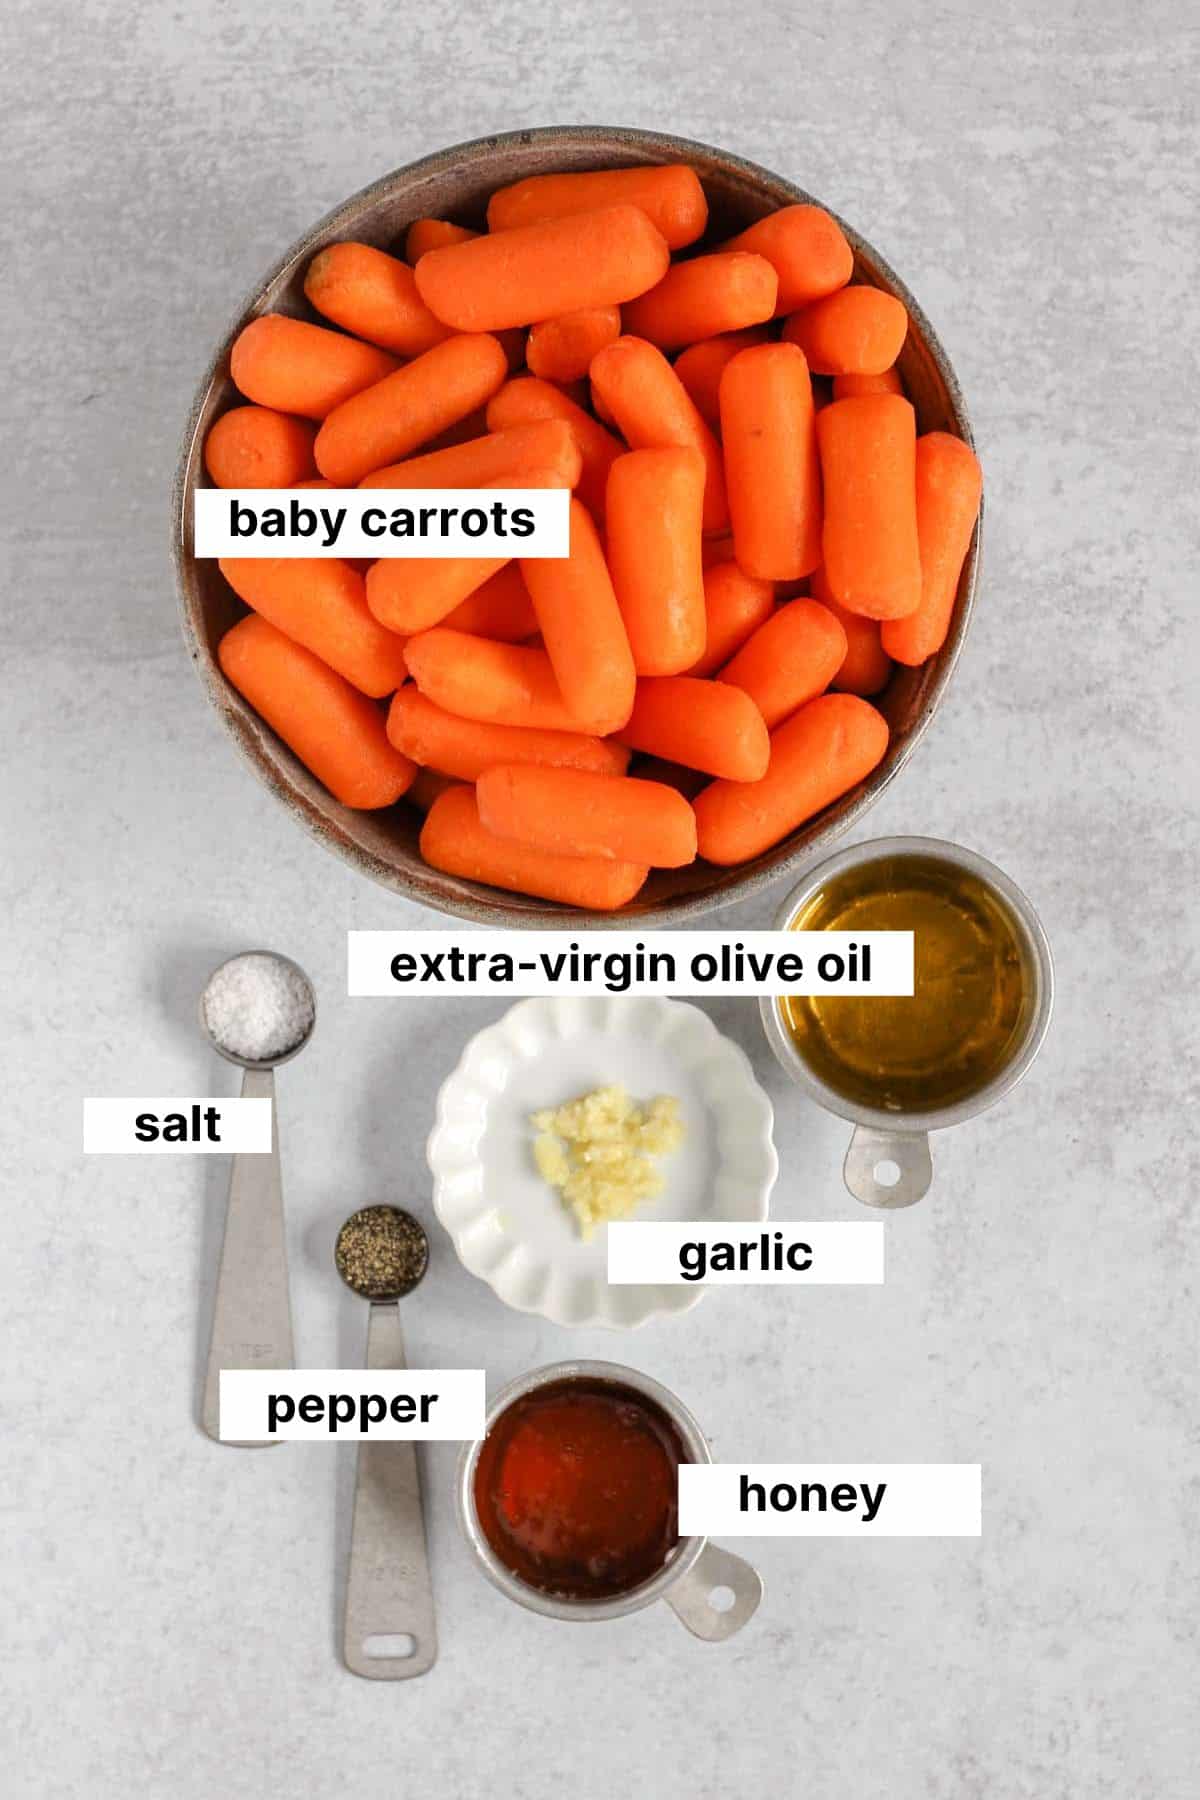 Labeled ingredients for air fried baby carrots.